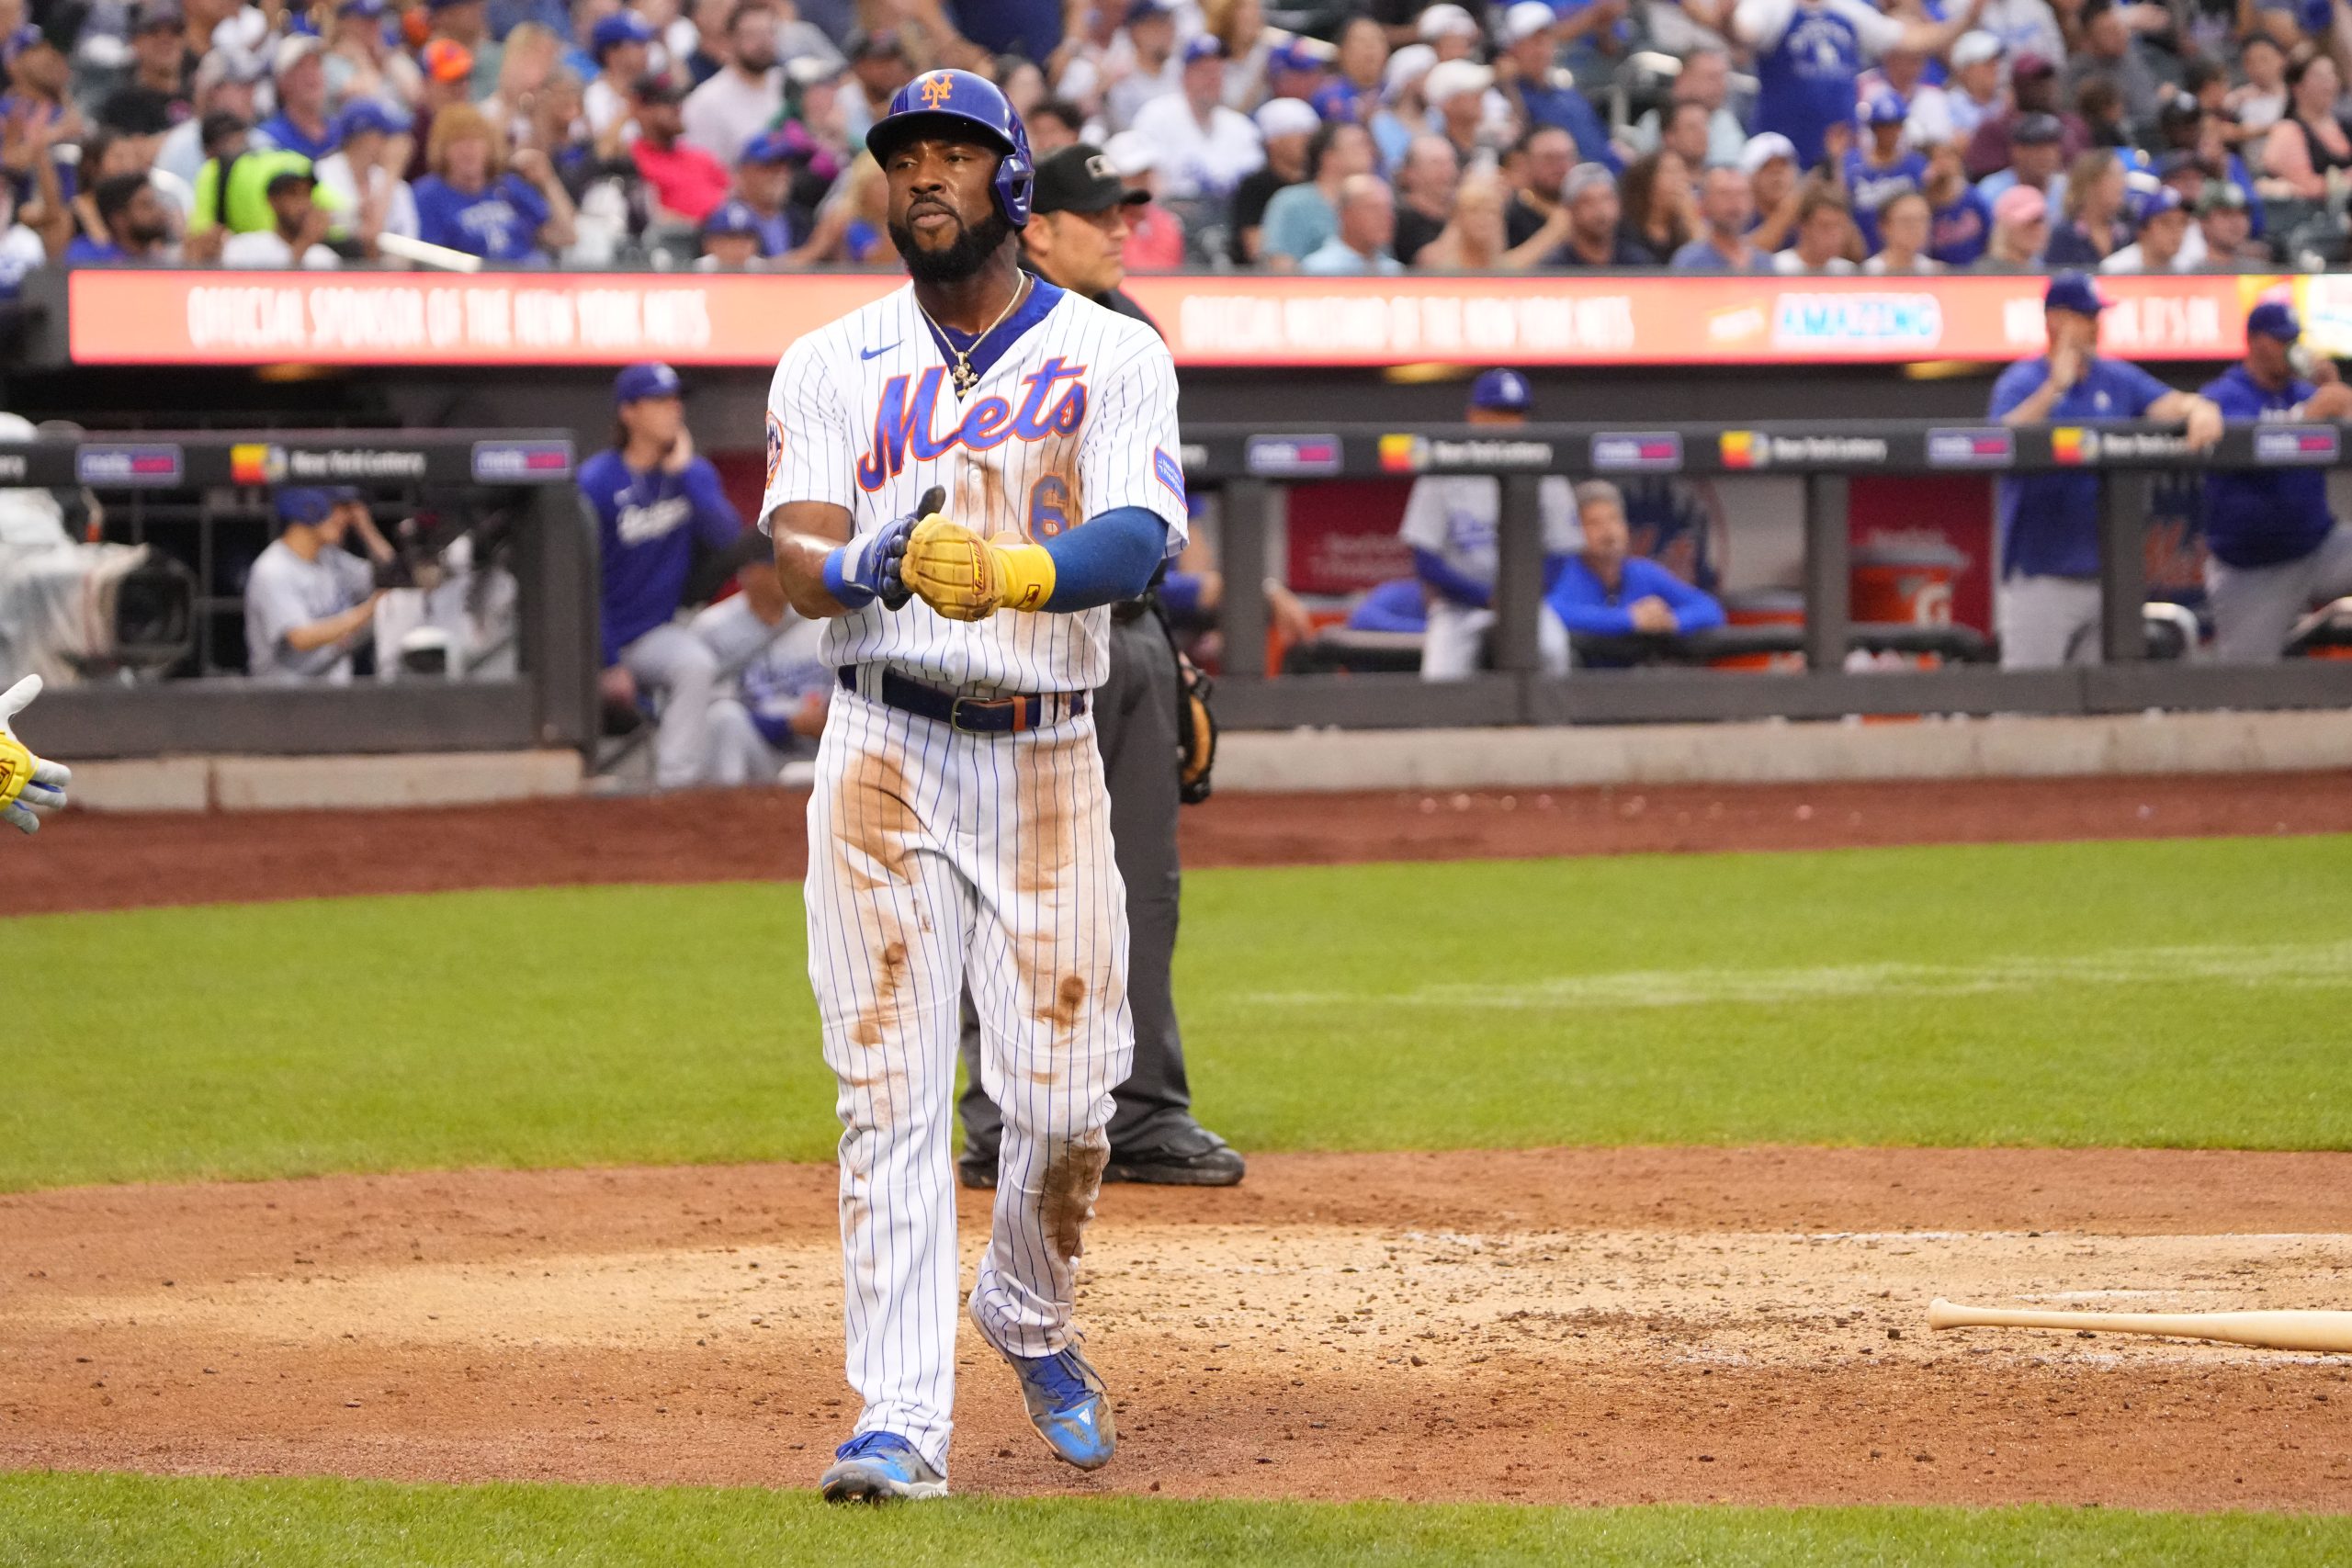 Starling Marte remains red-hot since return to Mets